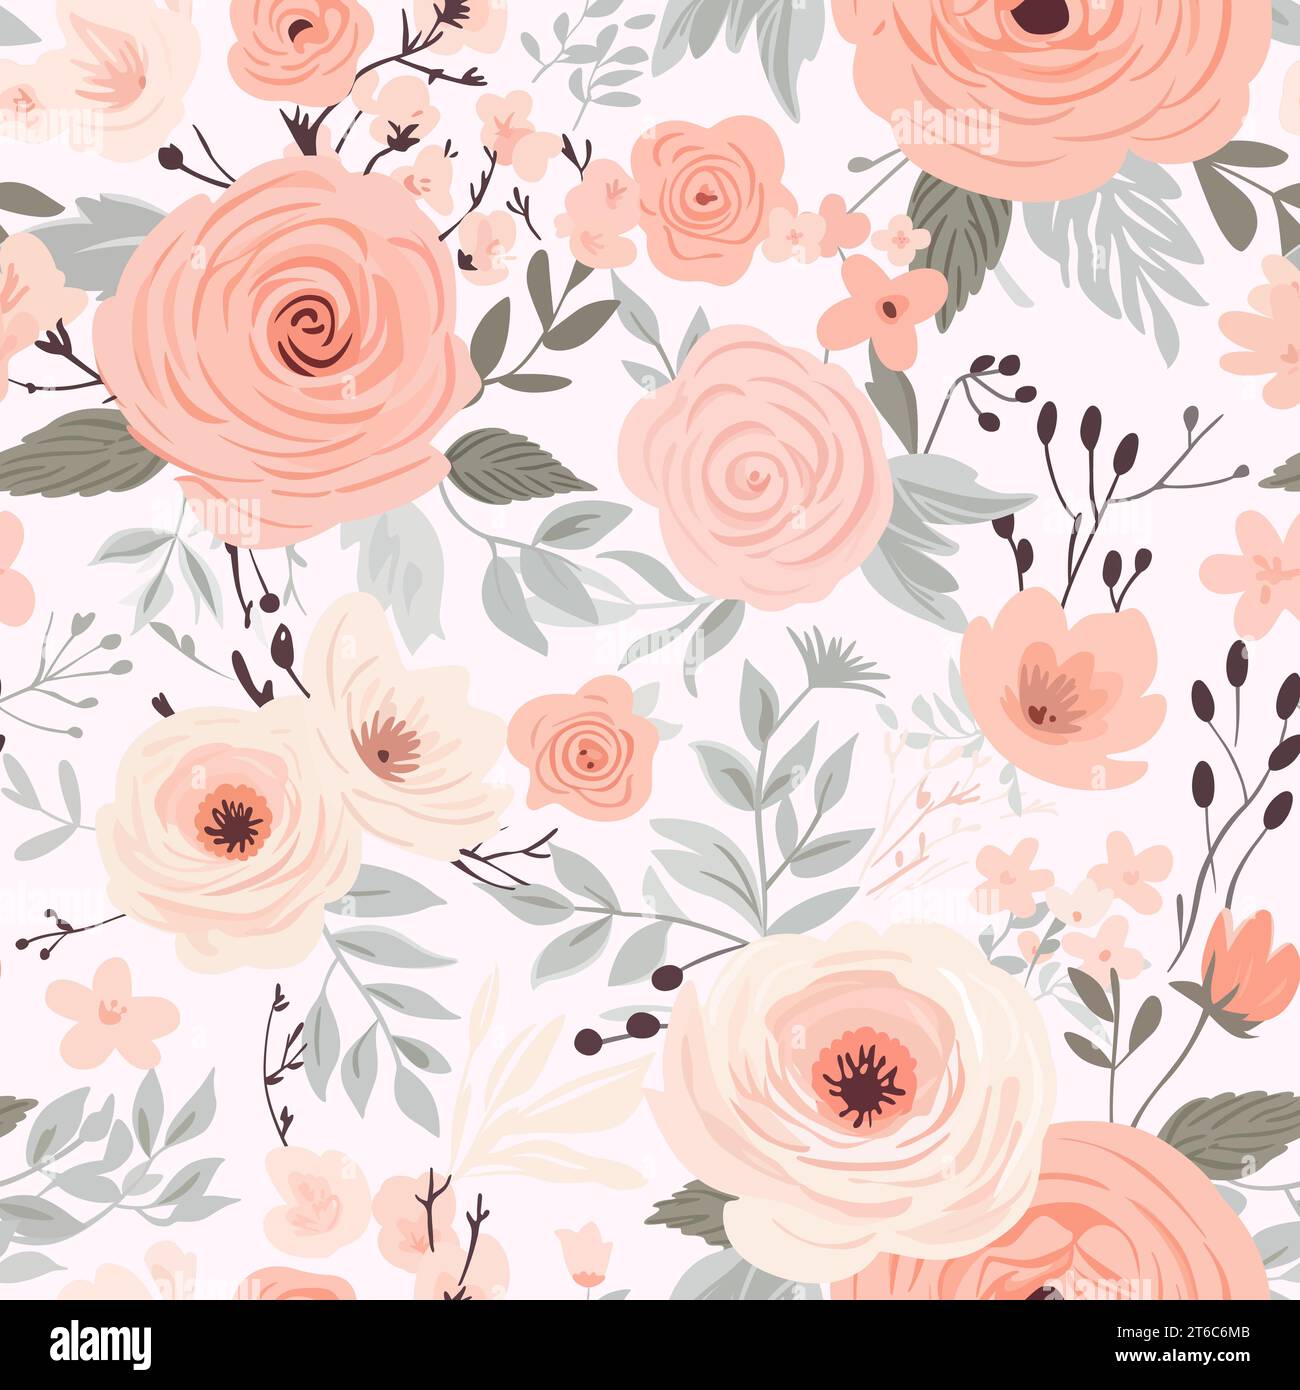 Seamless delicate pattern with ivory roses and powder pink roses on white. Wedding mood background in pastel colors. Vector format. Stock Vector